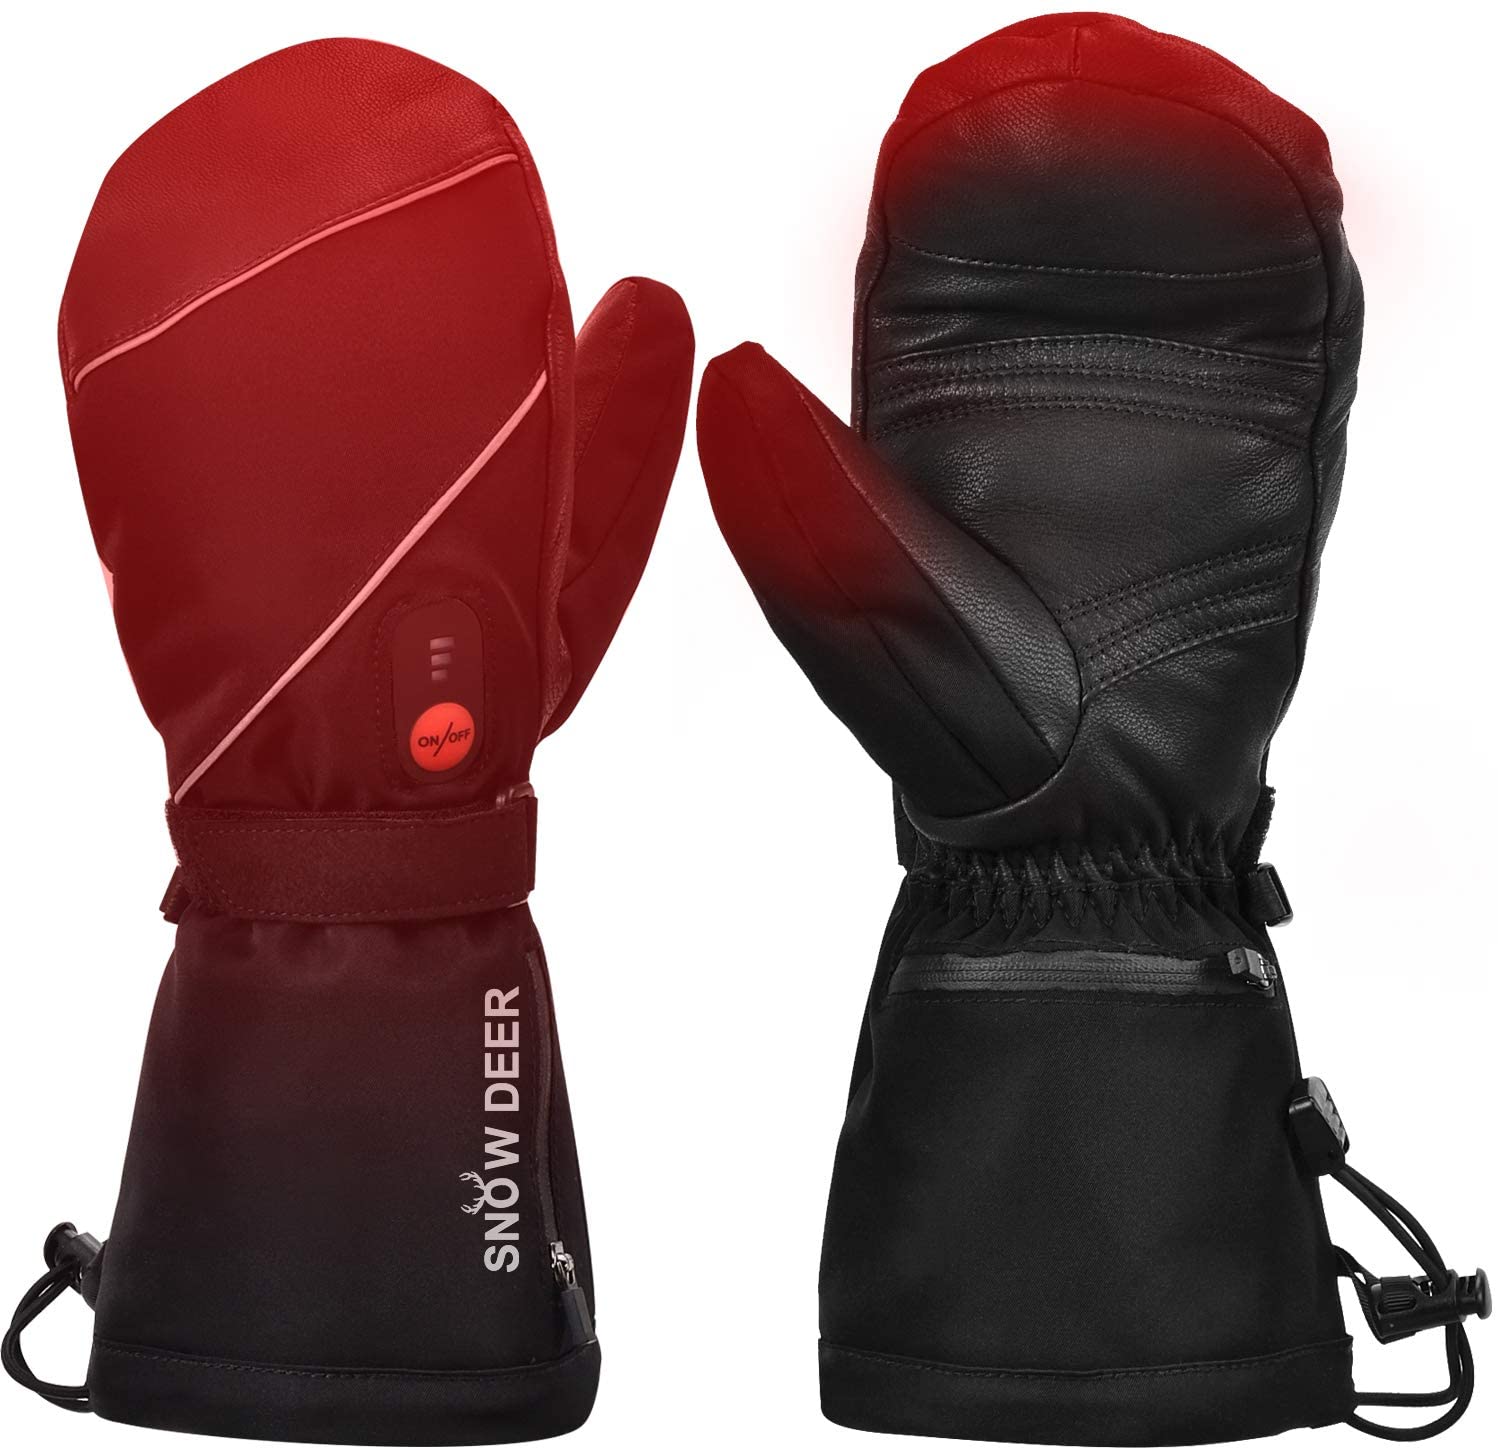 SNOW DEER 7.4V 2200MAH Rechargeable Heated Ski Mittens